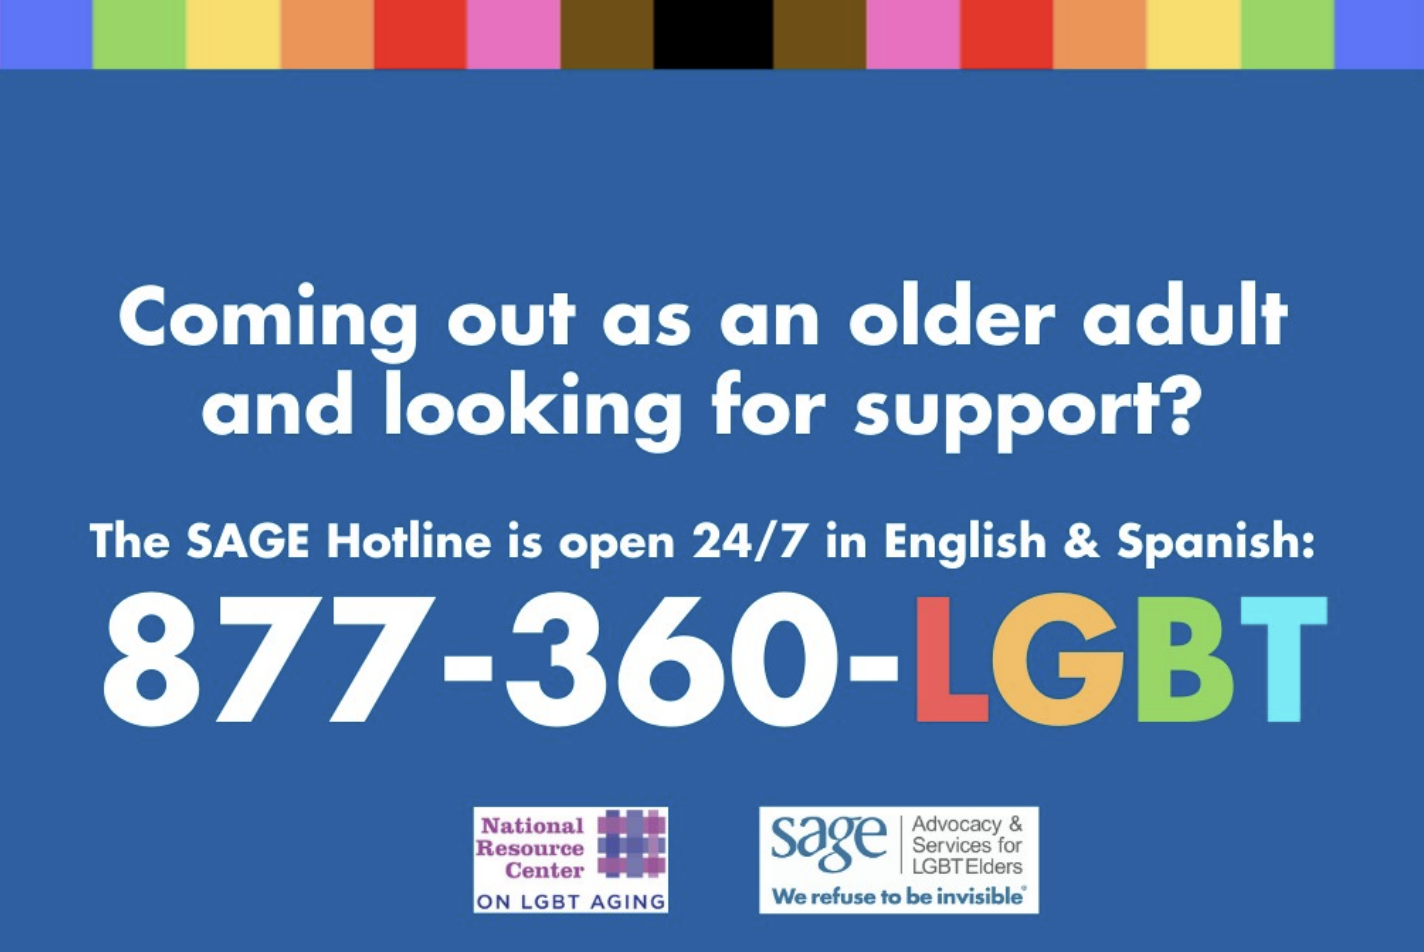 the SAGE hotline is open 24/7 at 877-360-LGBT